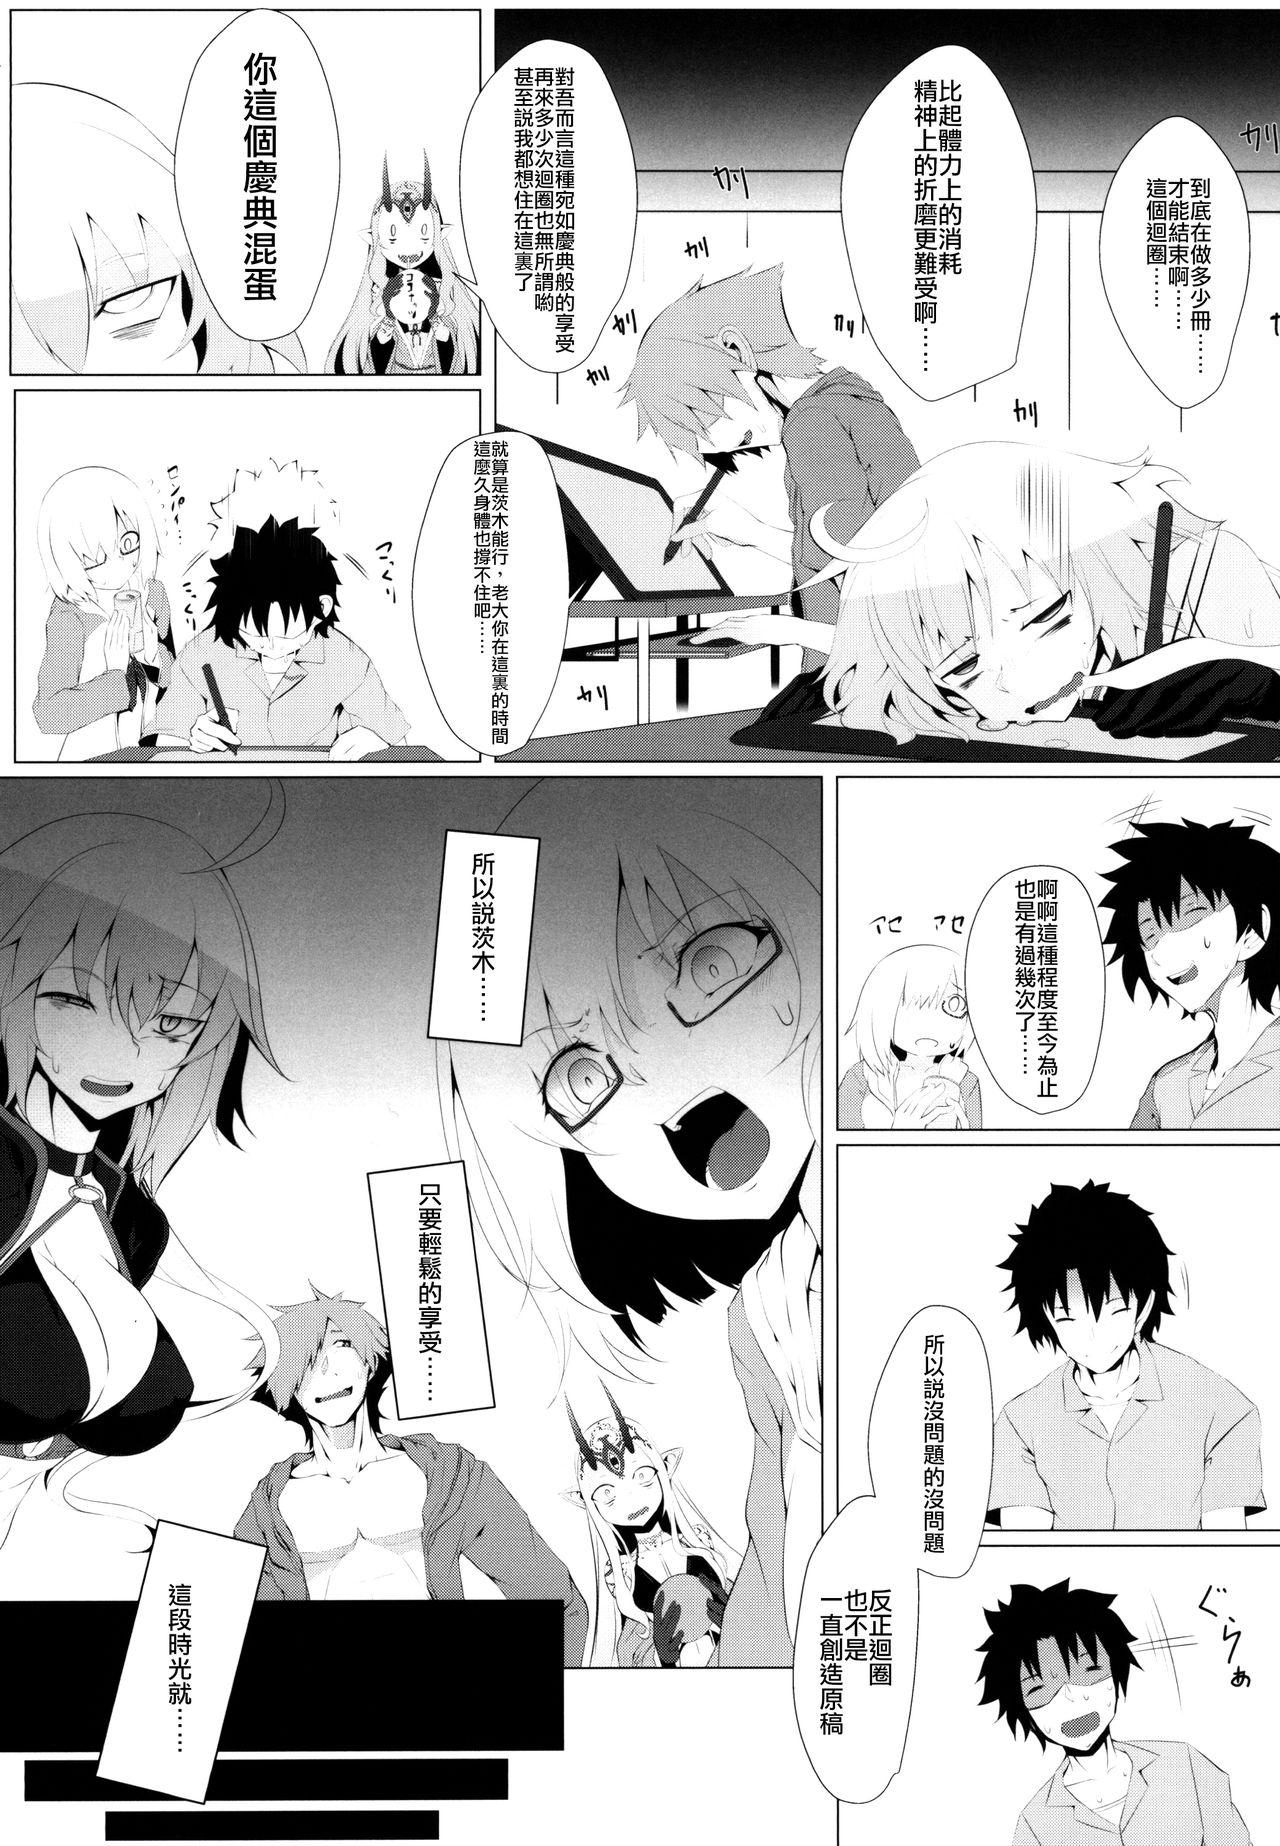 Shaking M.P. Vol. 18 - Fate grand order Jerkoff - Page 5